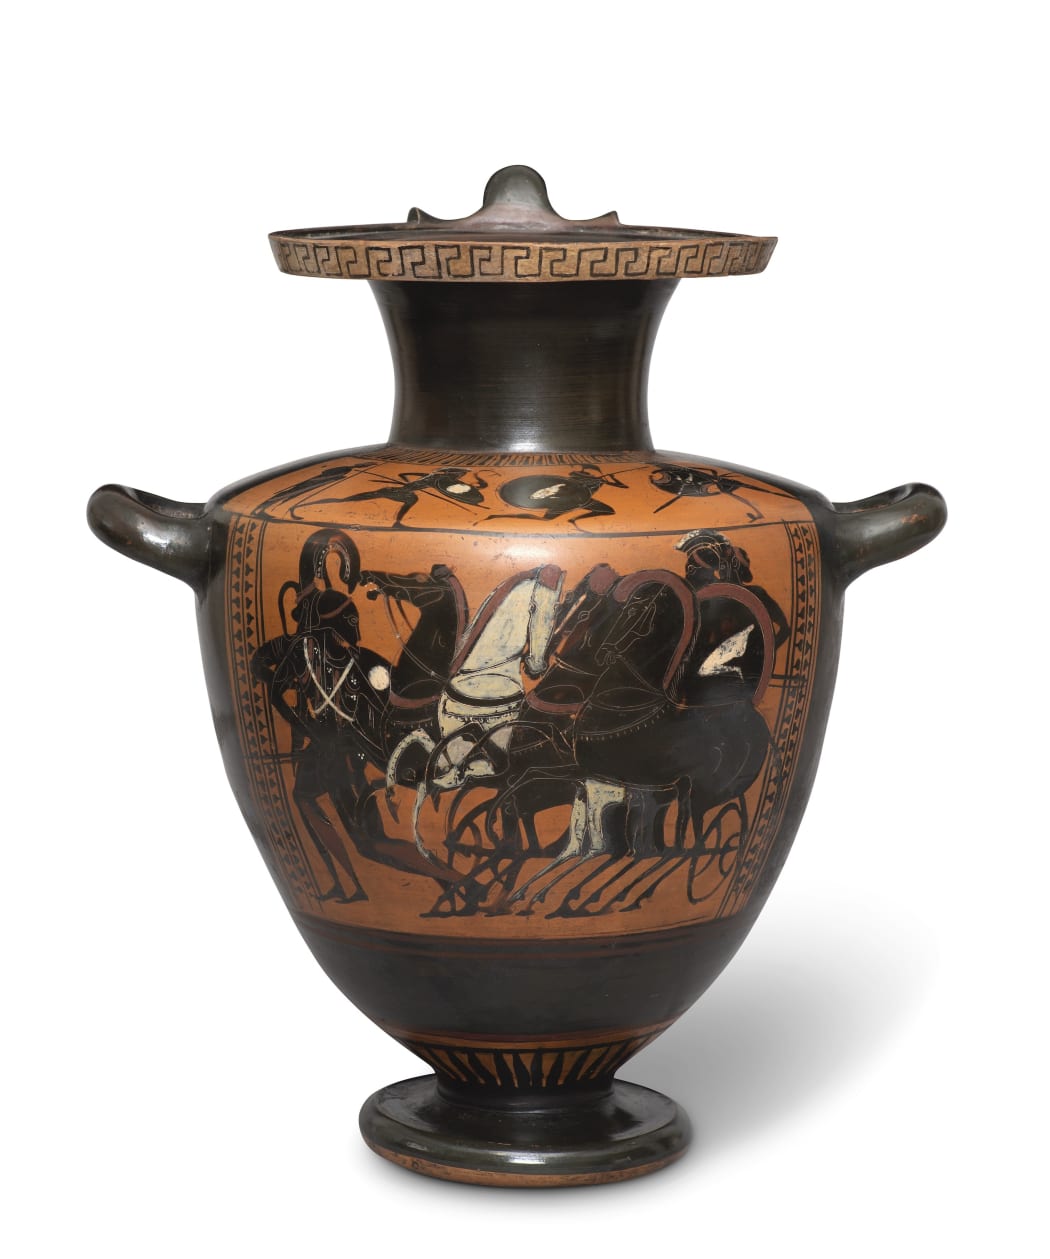 AN ATTIC BLACK-FIGURE HYDRIA, IN THE MANNER OF THE LYSIPPIDES PAINTER, circa 530 - 510 BC